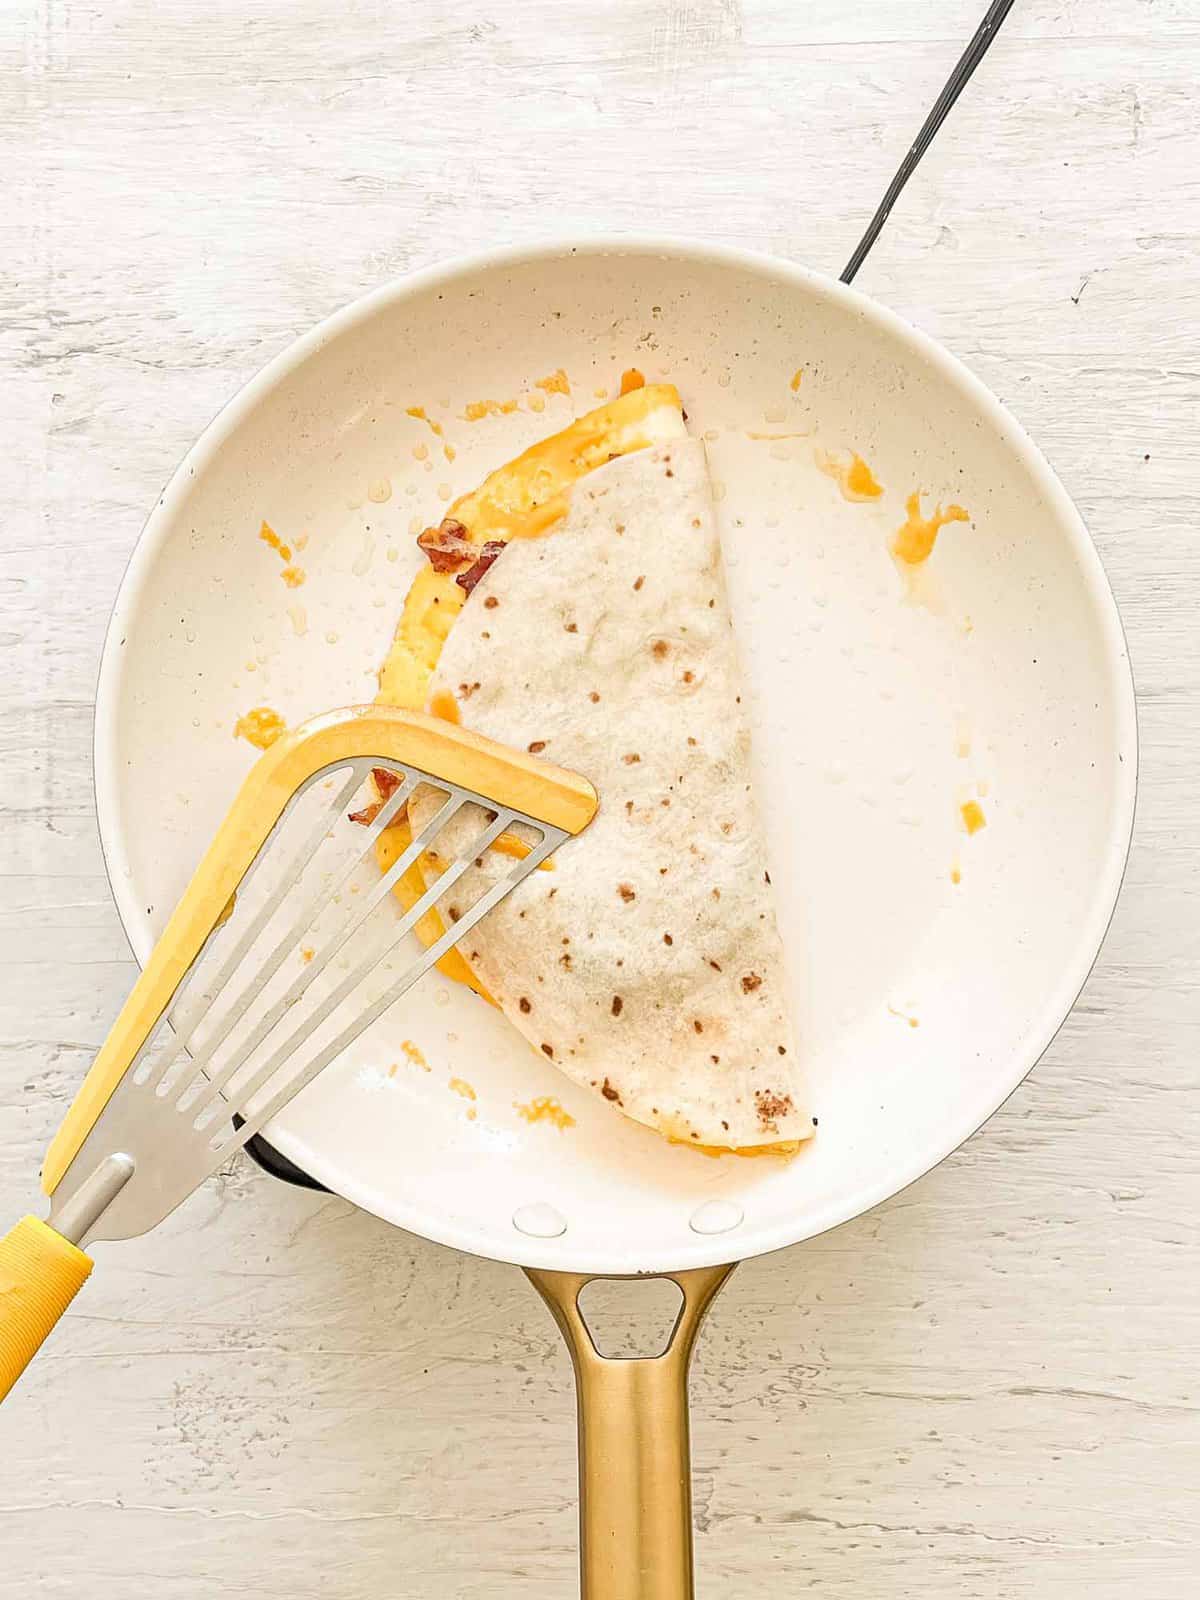 Breakfast Quesadilla being made by folding tortilla in half on to eggs and cheese